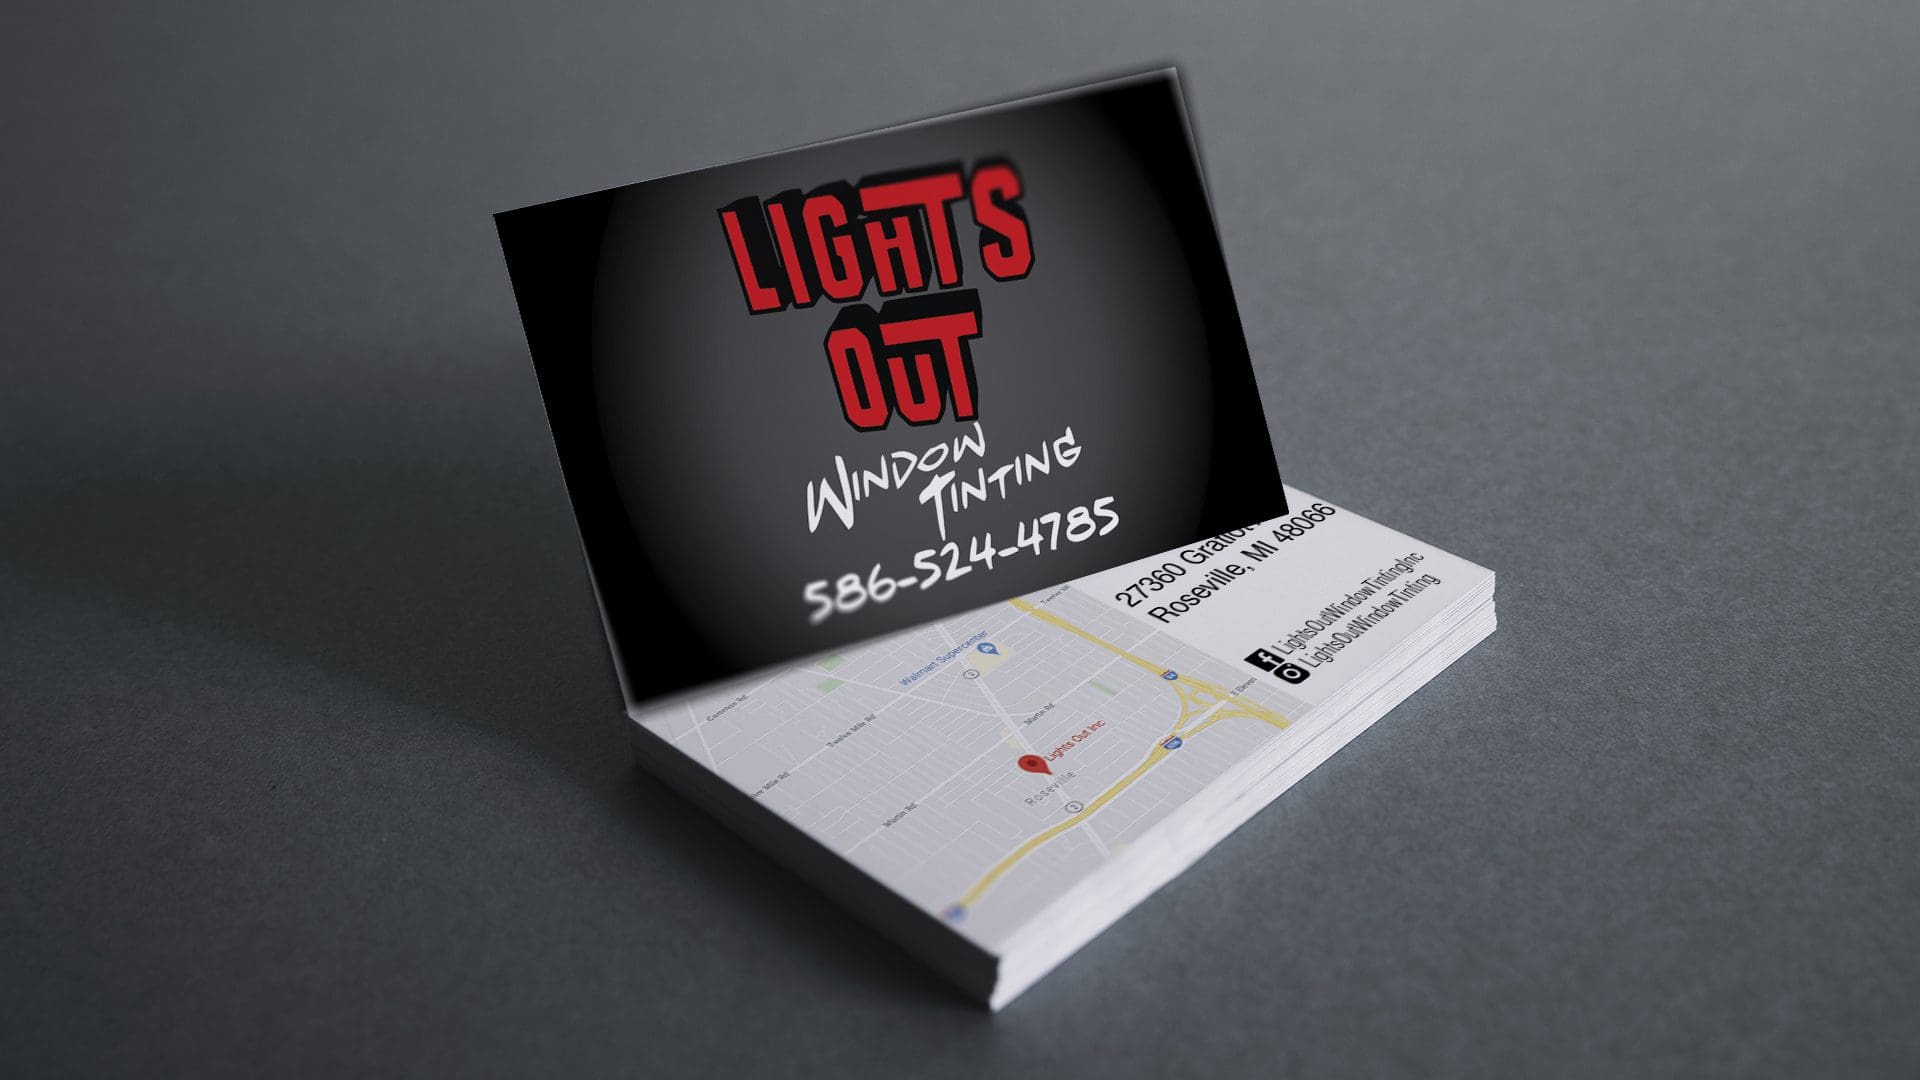 Lights Out Window Tinting - Business Card Mockup V1